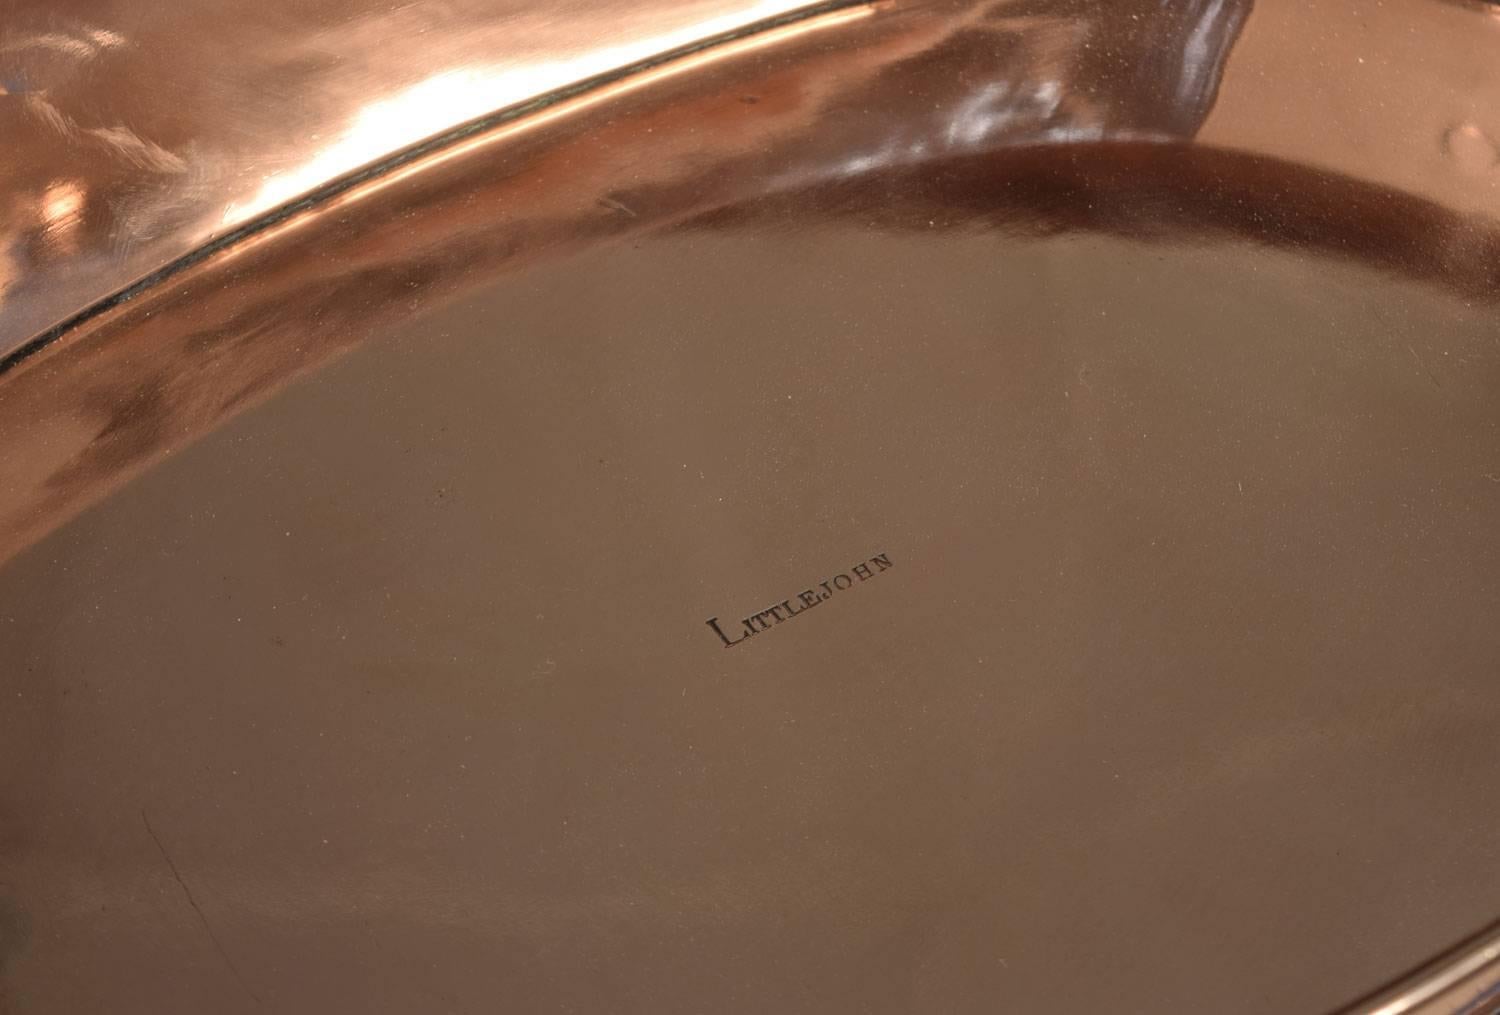 Victorian Large Heavy Copper Oval Baking Dish, Saute Pan or Paella Dish